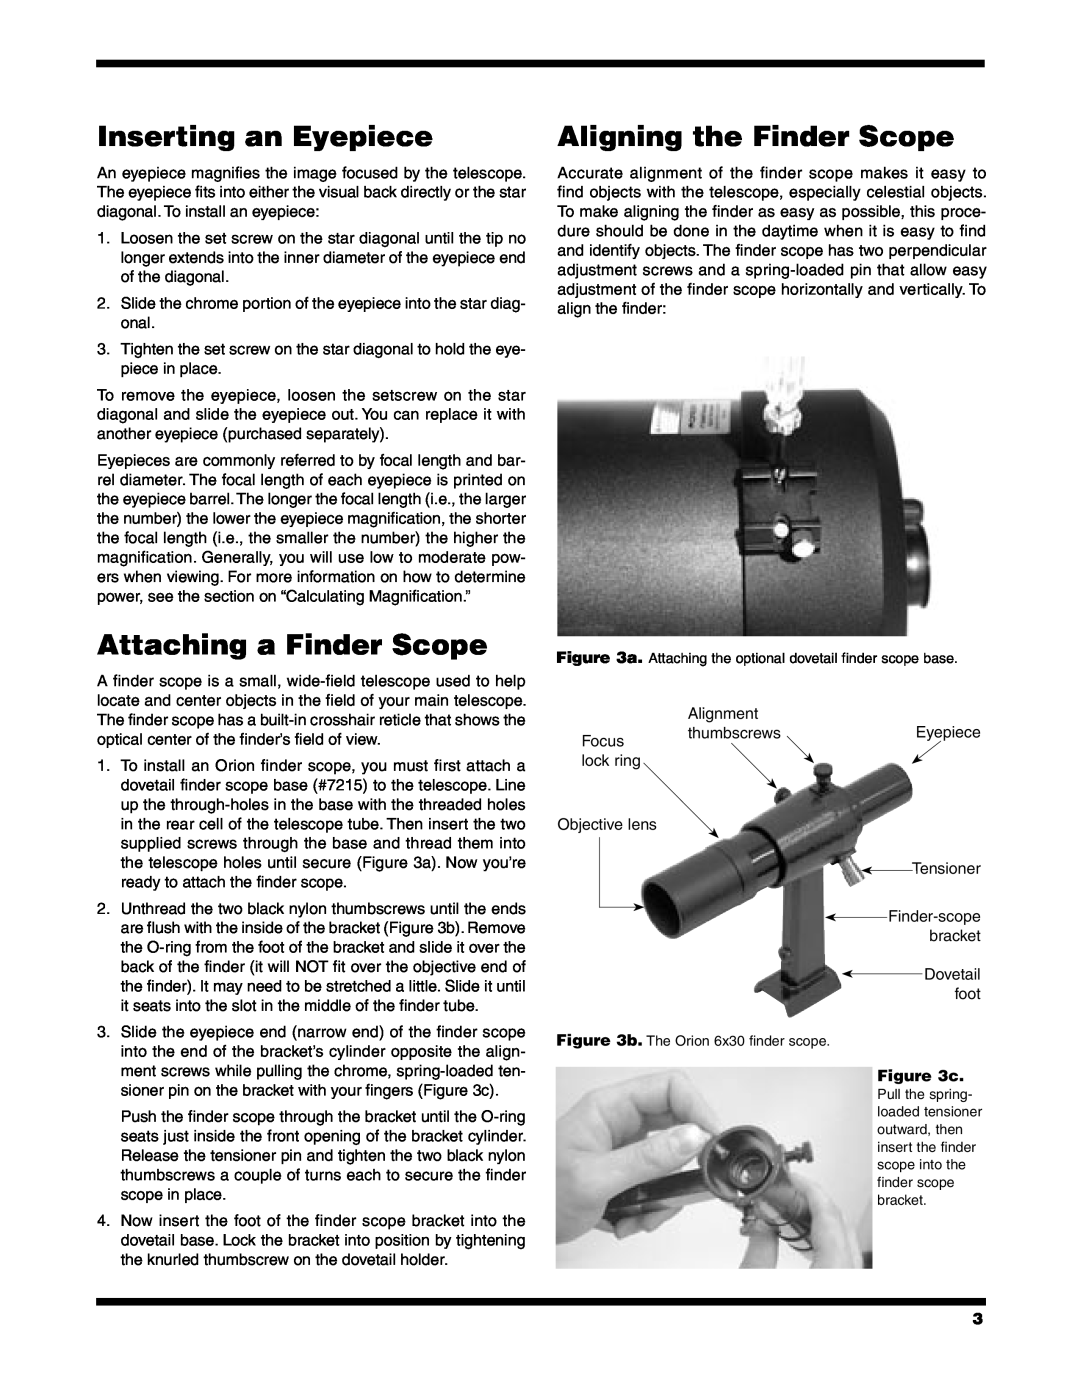 Orion Telescope instruction manual Inserting an Eyepiece, Attaching a Finder Scope, Aligning the Finder Scope 